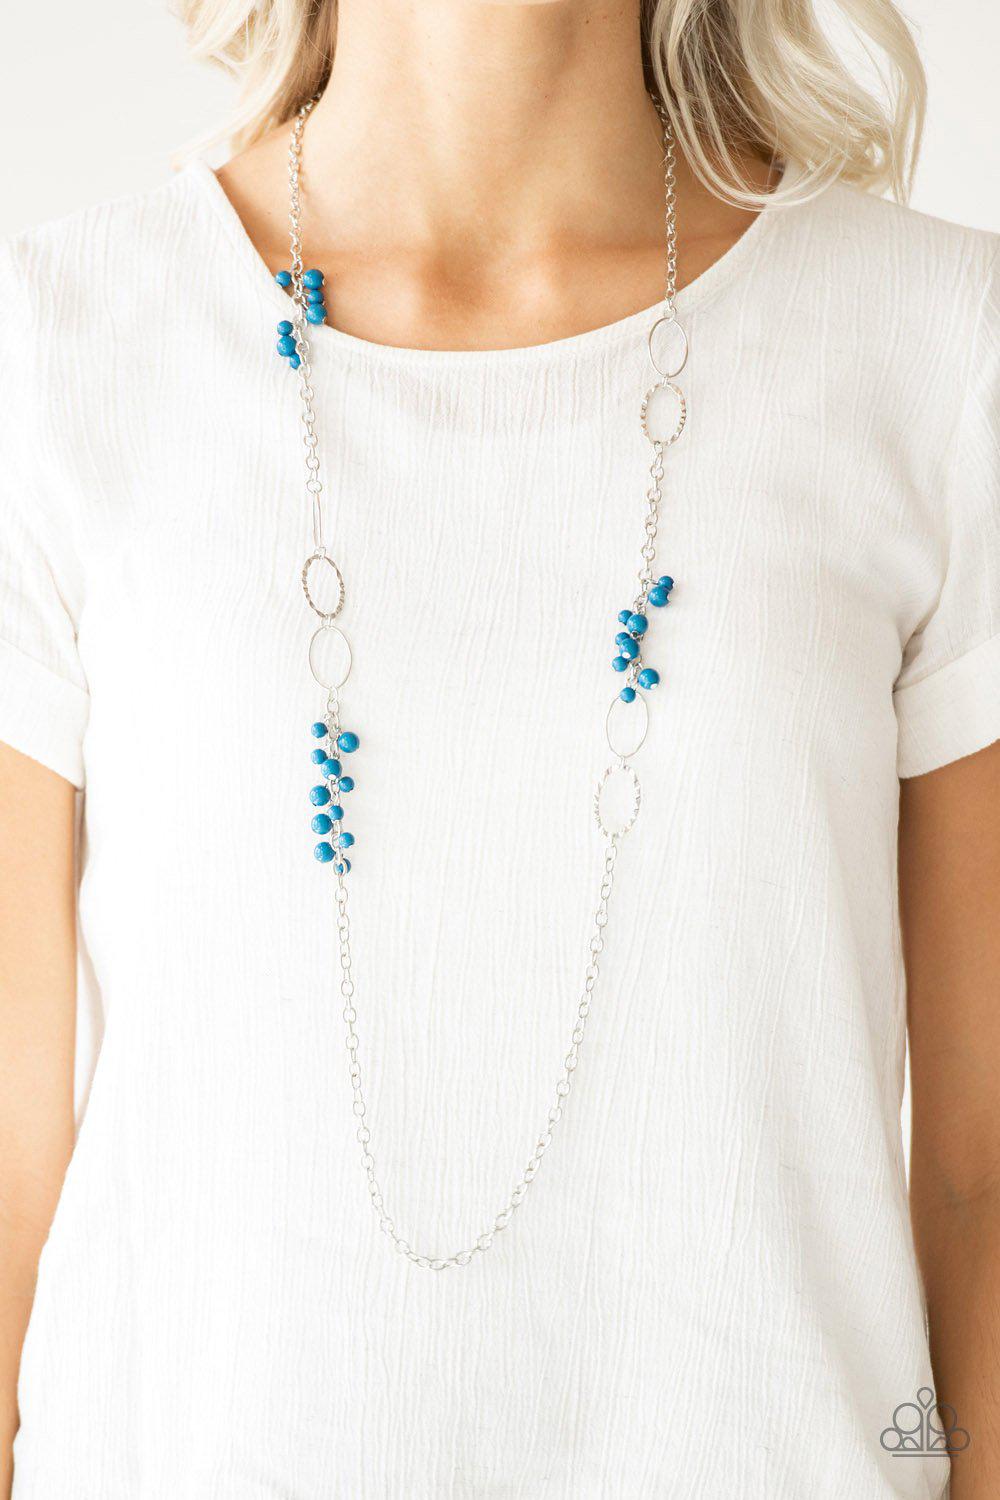 Flirty Foxtrot Blue and Silver Necklace - Paparazzi Accessories - lightbox -CarasShop.com - $5 Jewelry by Cara Jewels